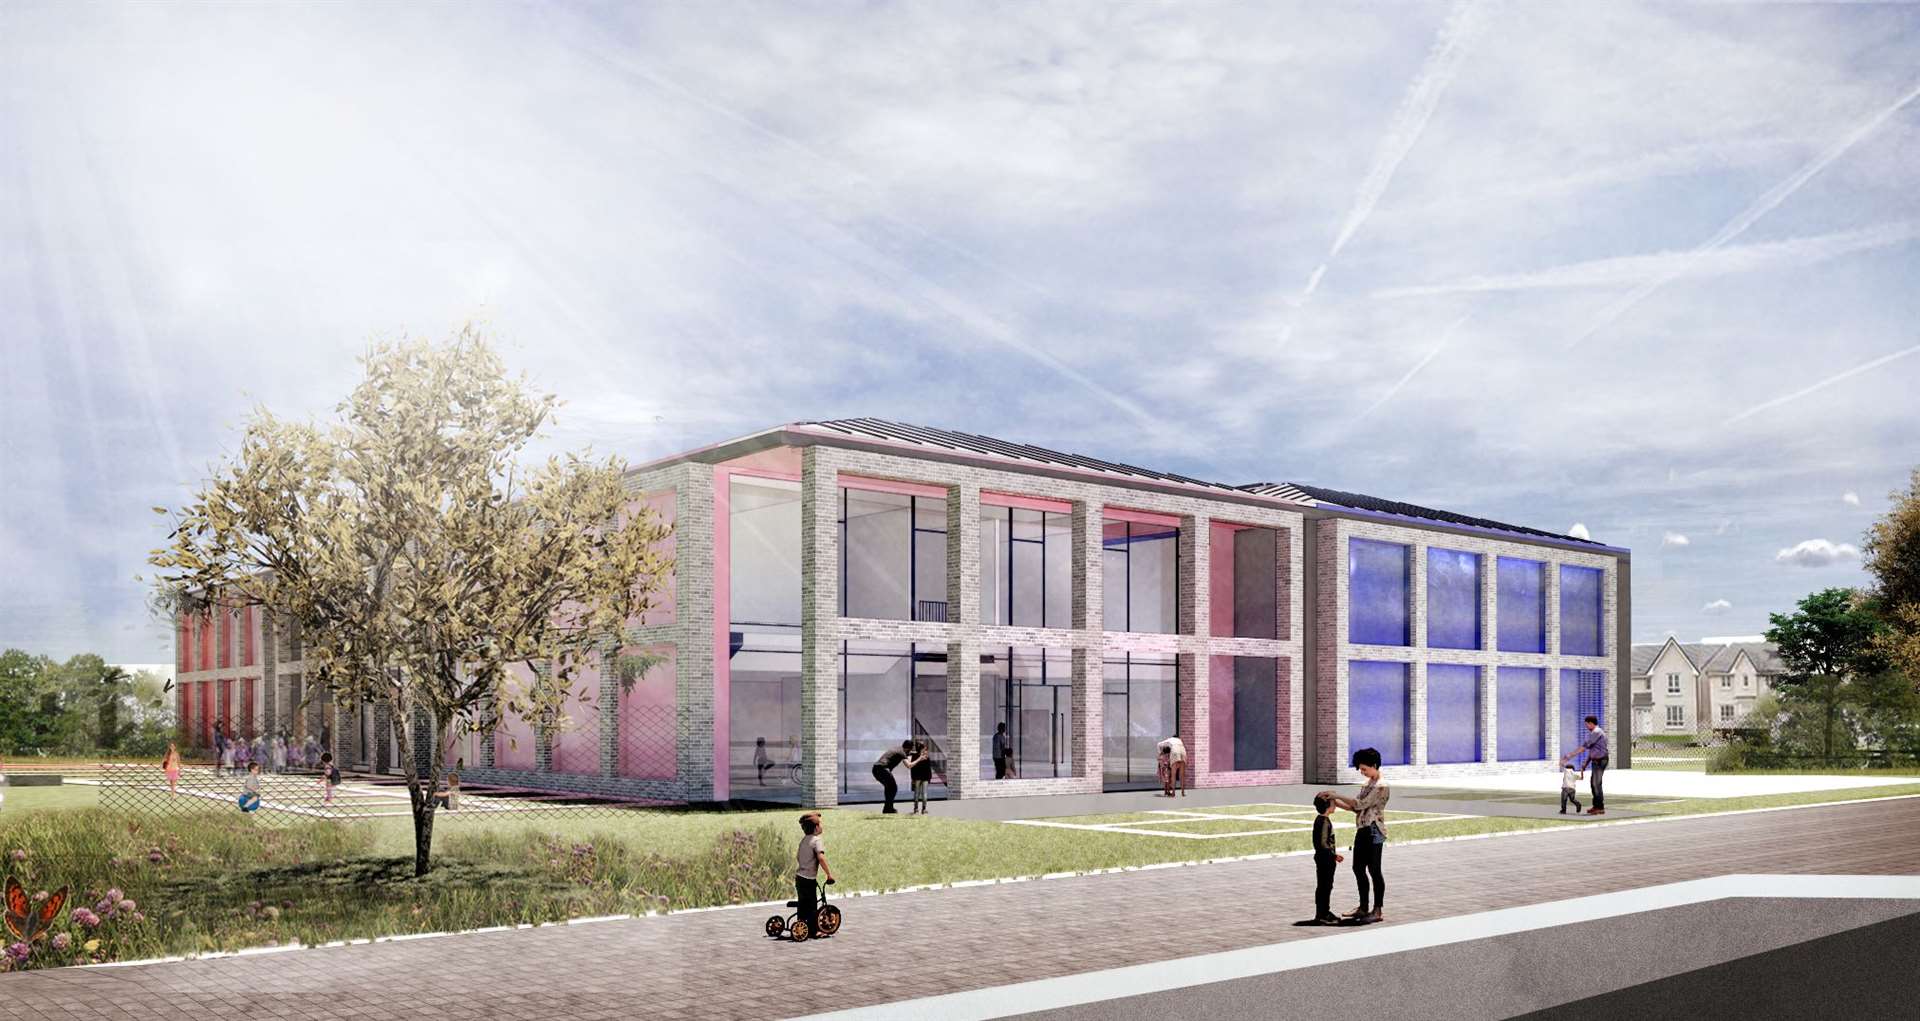 Artist's impression of the Ness Castle primary school, ©Stallan-Brand Architects.